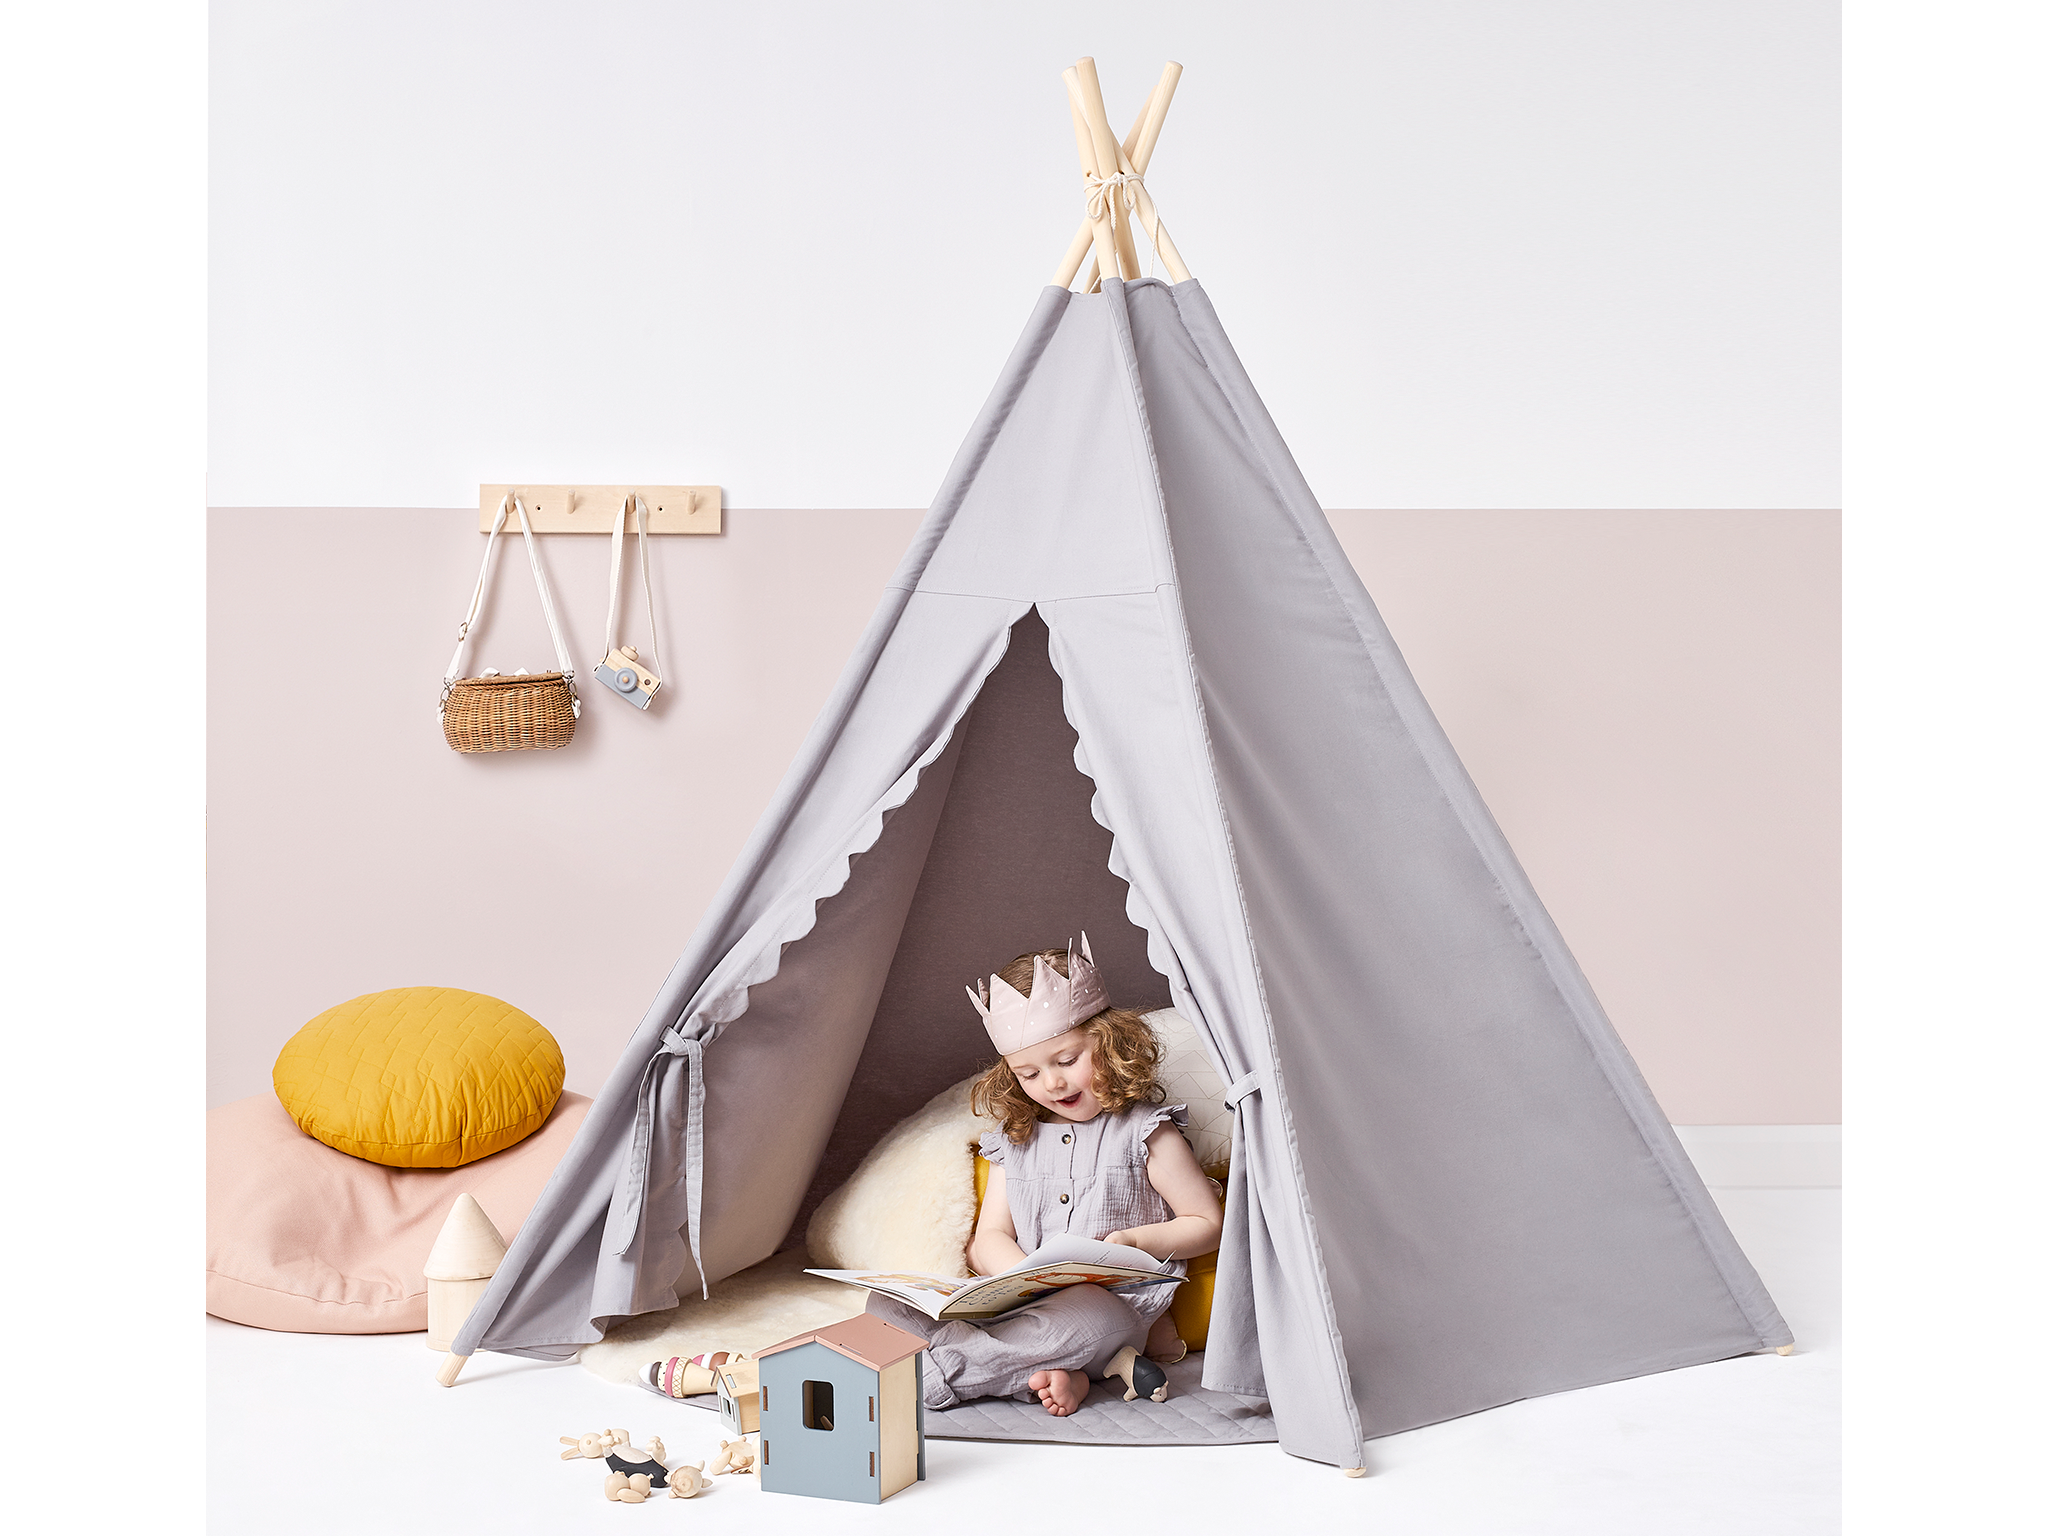 Boys Indoor Outdoor Fairy Lights Teepee Tent for Kids with Artificial Vines Natural Cotton Canvas Teepee Play Tent Foldable Tipi Childrens Tents for Girls 